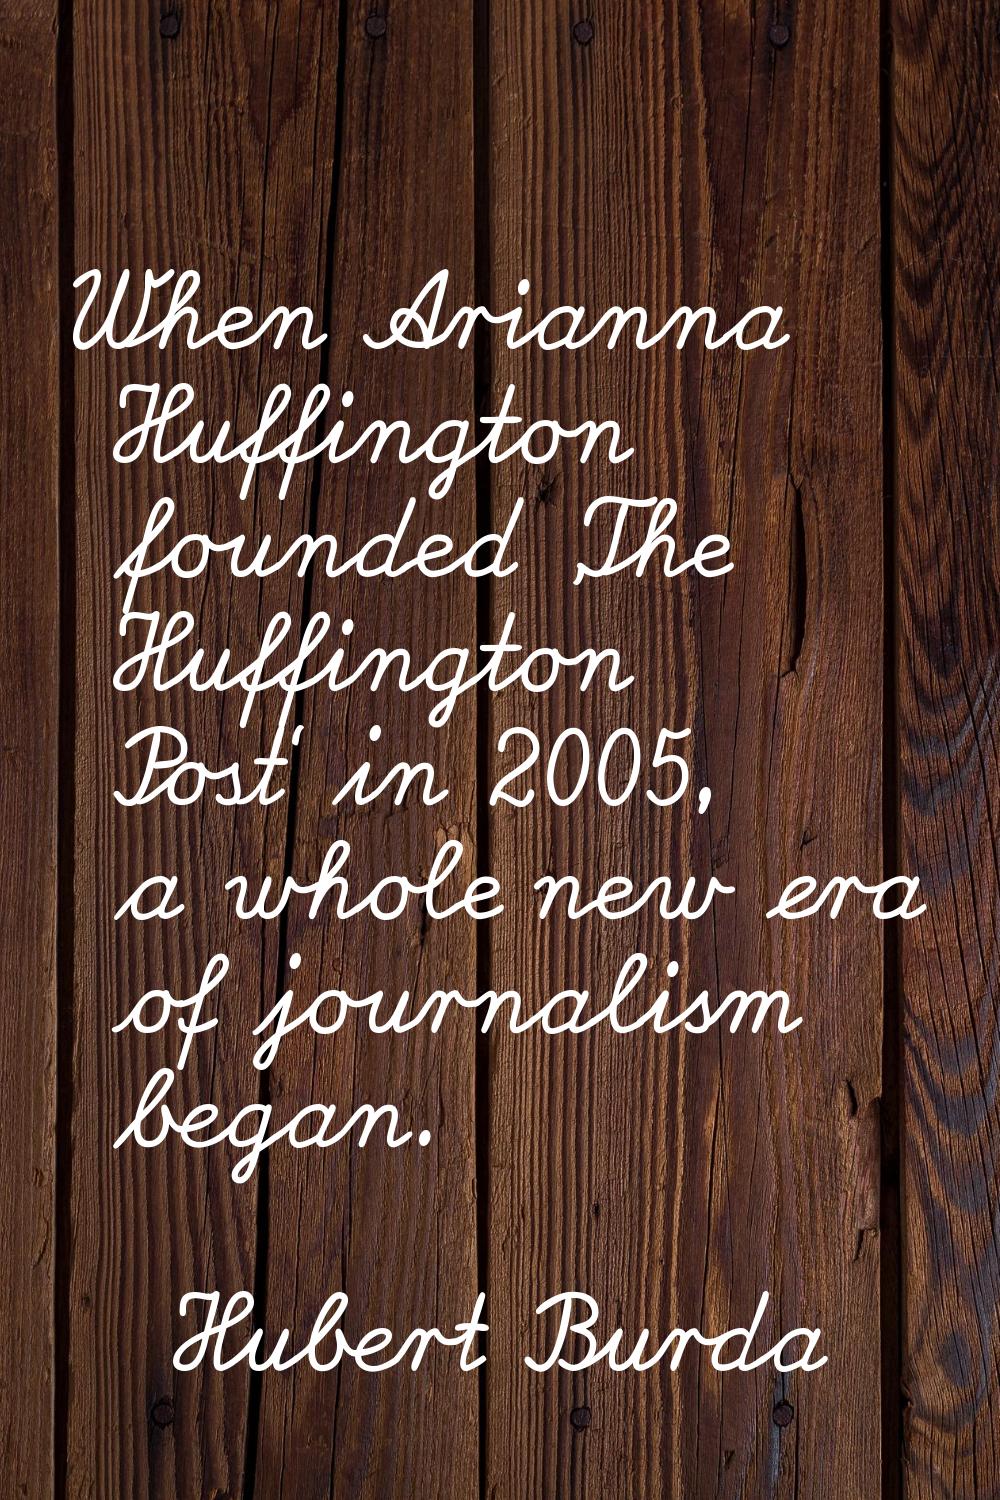 When Arianna Huffington founded 'The Huffington Post' in 2005, a whole new era of journalism began.